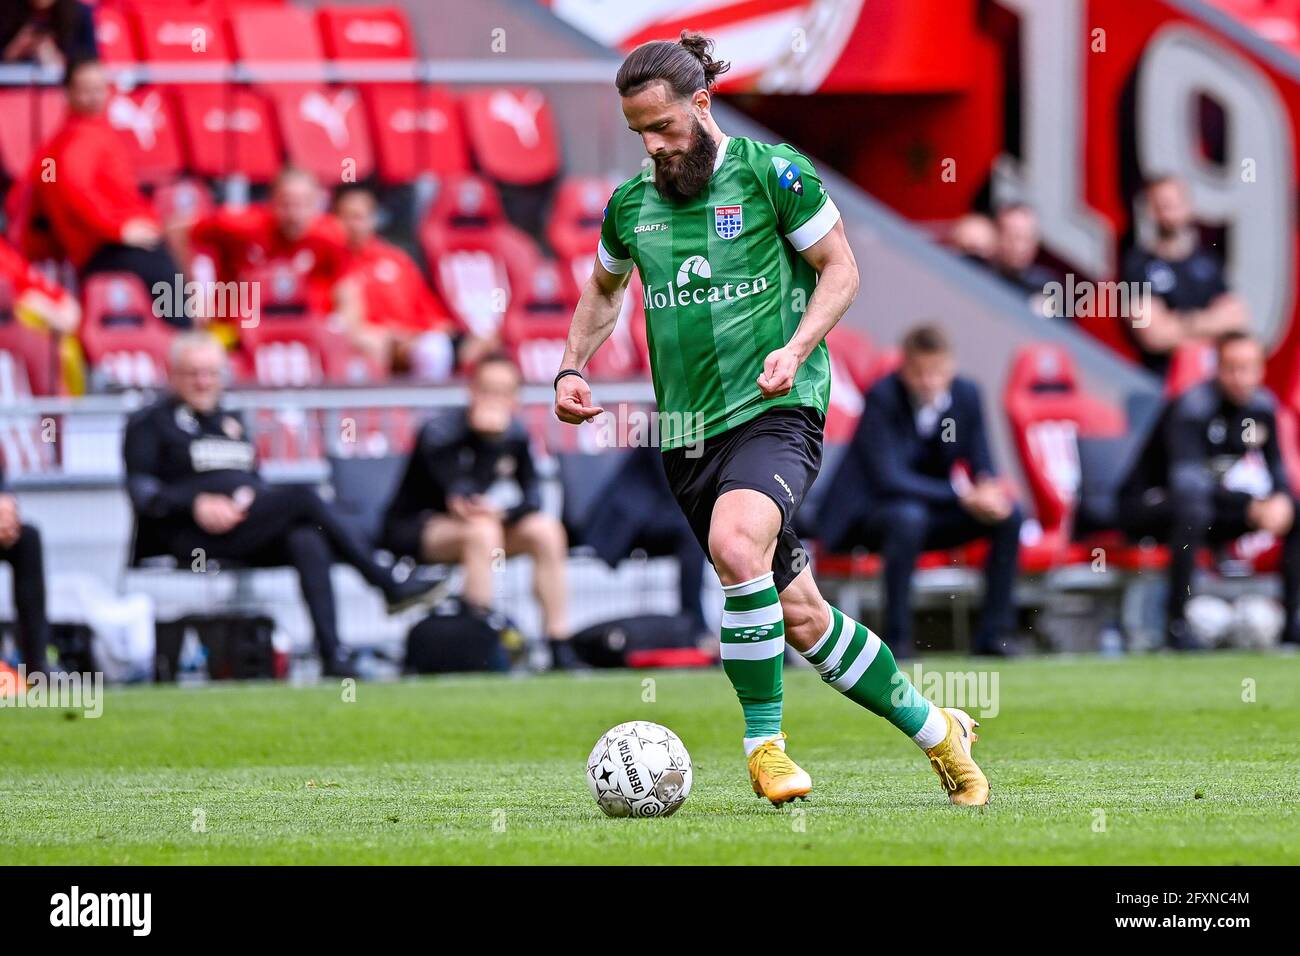 EINDHOVEN, NETHERLANDS - MAY 13: Destan Bajselmani of PEC Zwolle during the Dutch Eredivisie match between PSV and PEC Zwolle at Philips Stadium on Ma Stock Photo